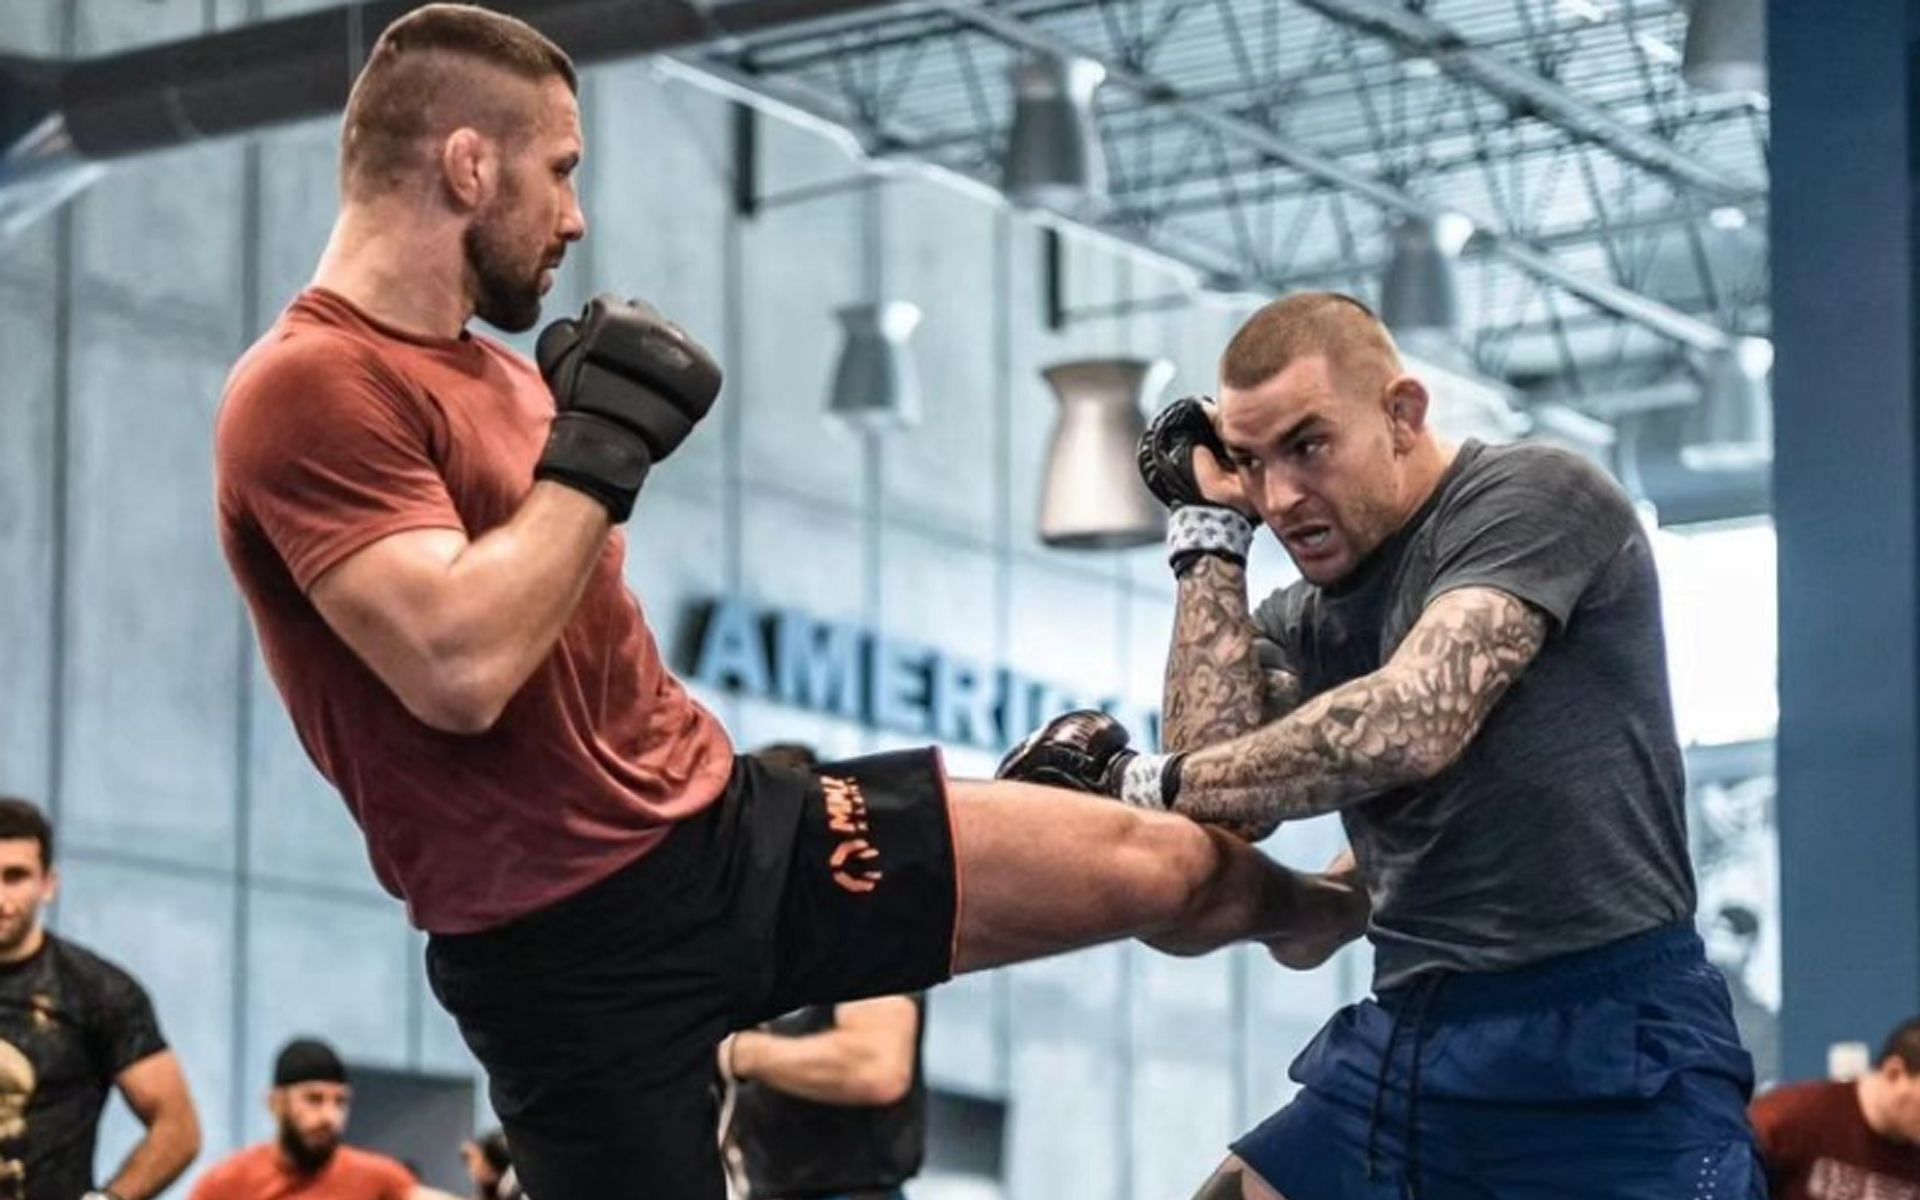 Dustin Poirier (right) during a sparring session with fellow lightweight Mateusz Gamrot (left) at the famed training academy [Image Courtesy: @dustinpoirier Instagram]